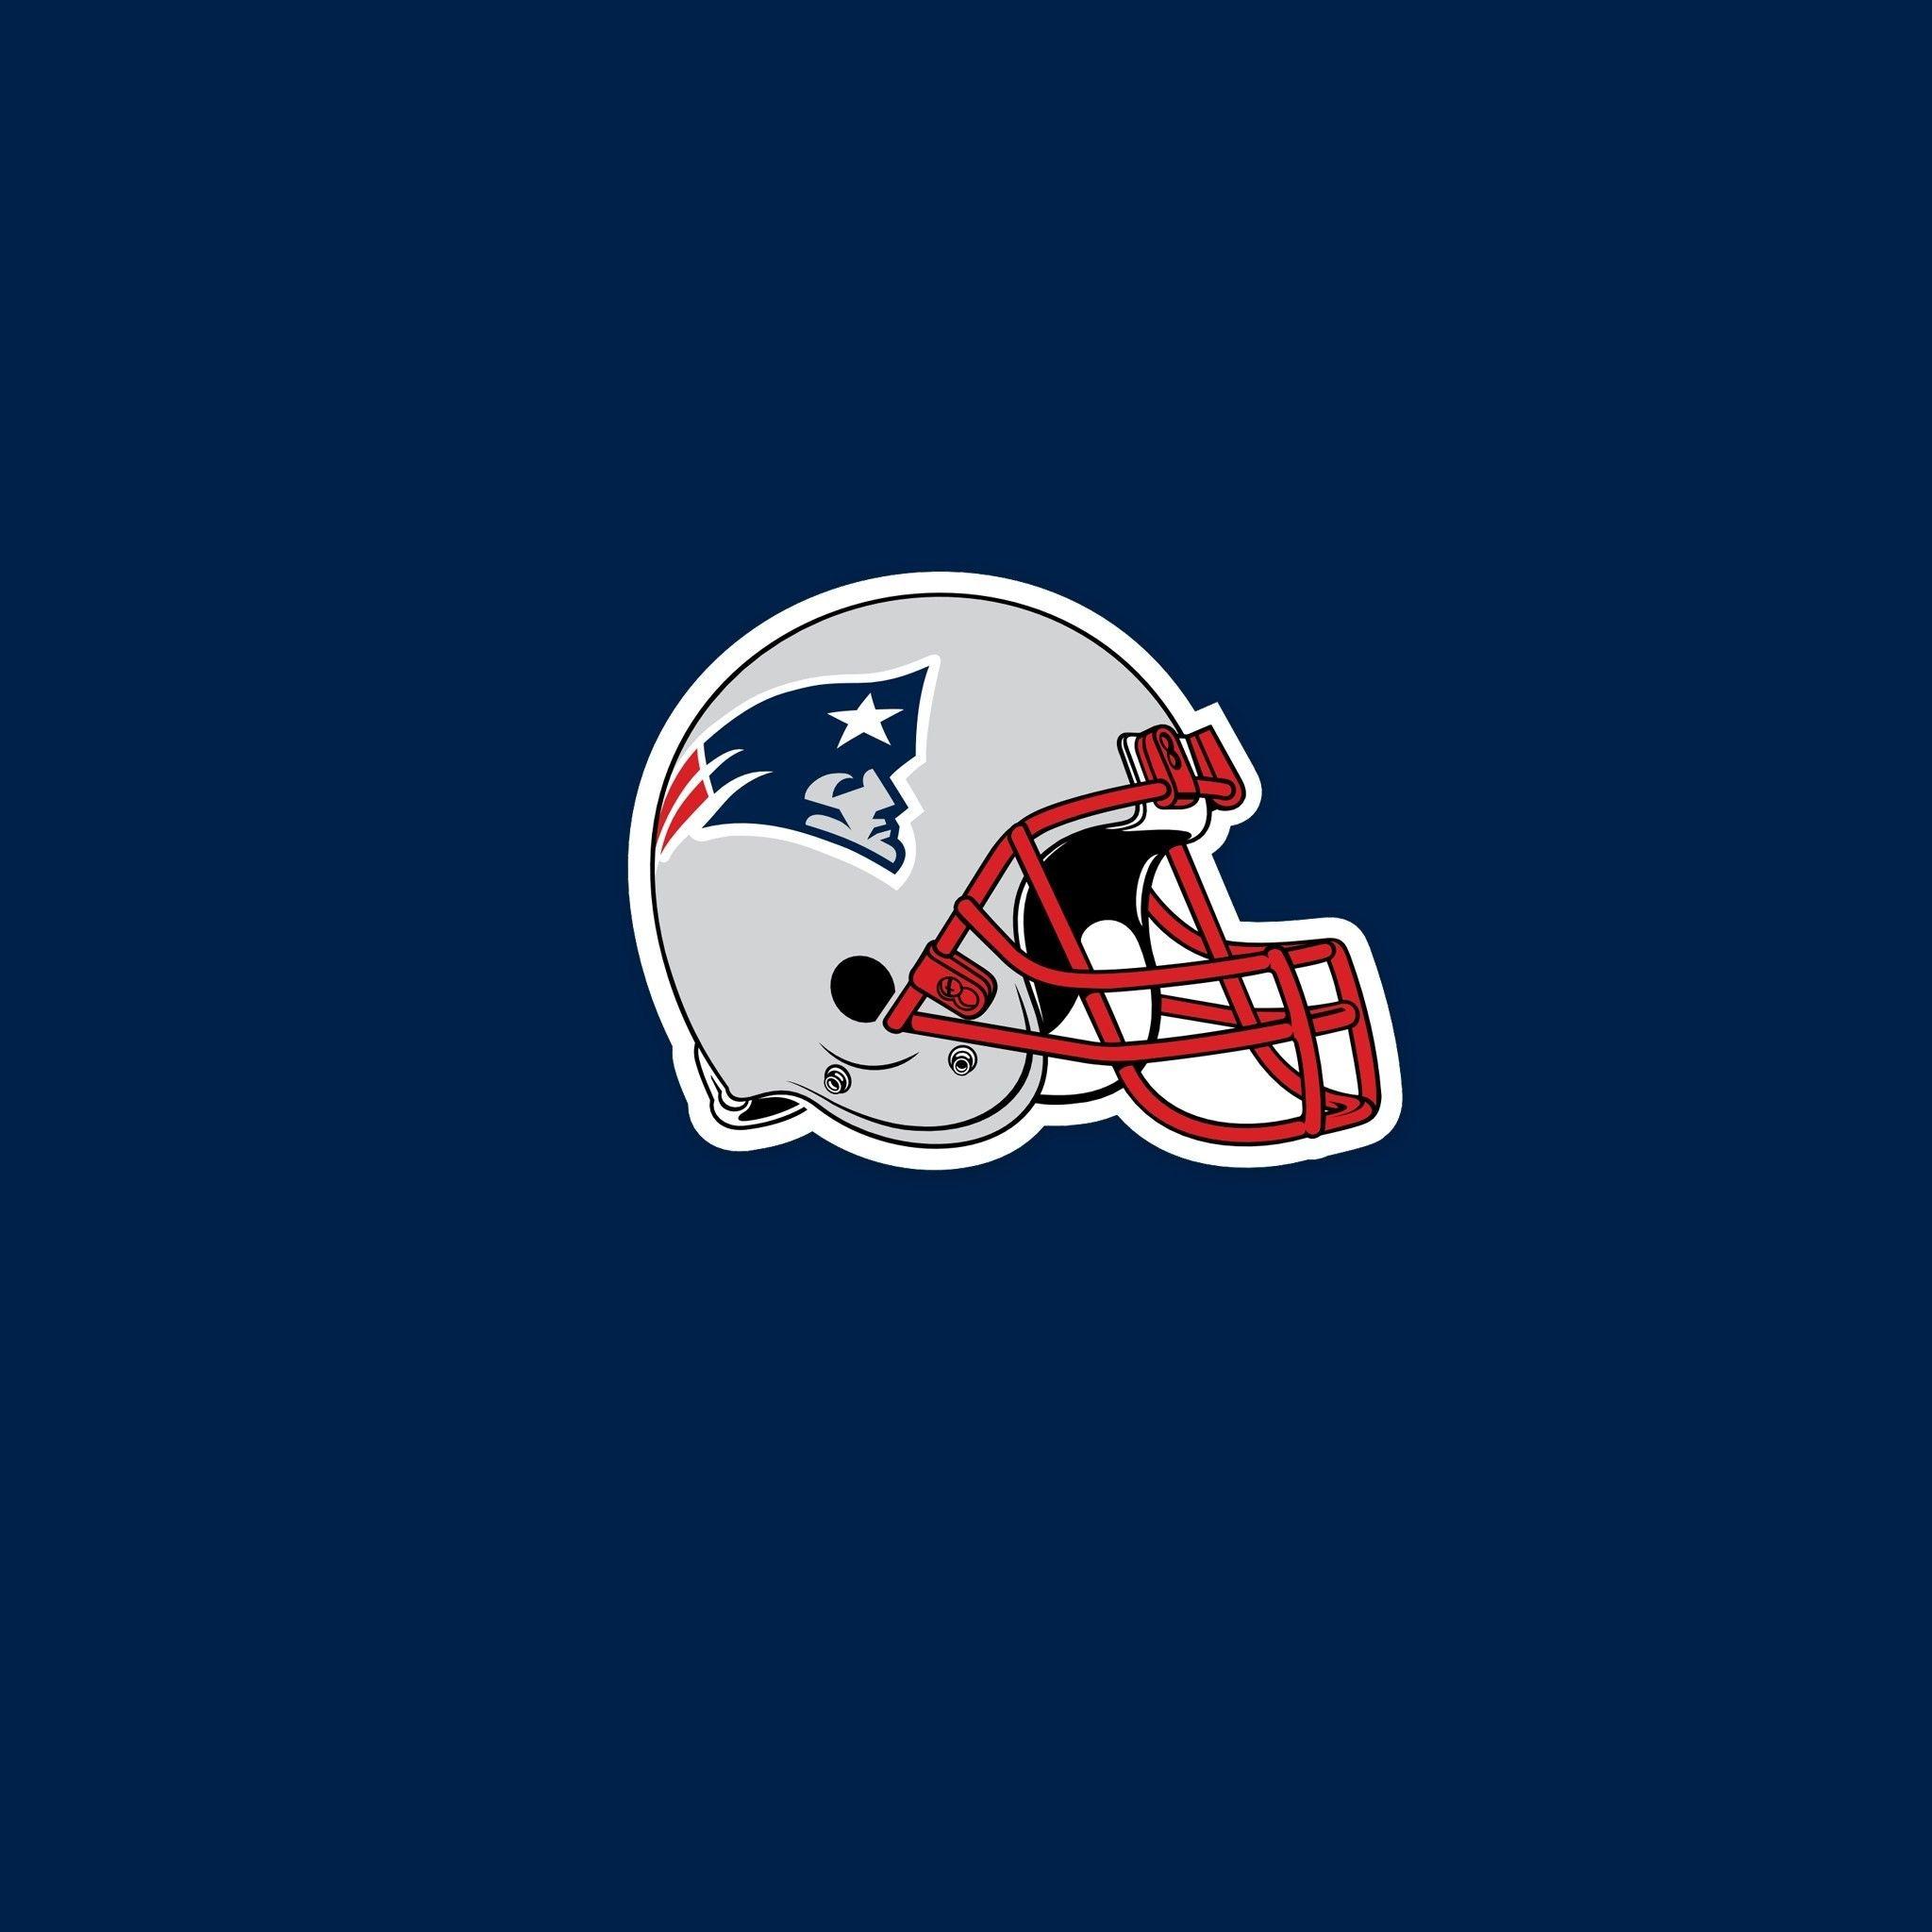 New England Patriots IPhone Wallpaper 83 images